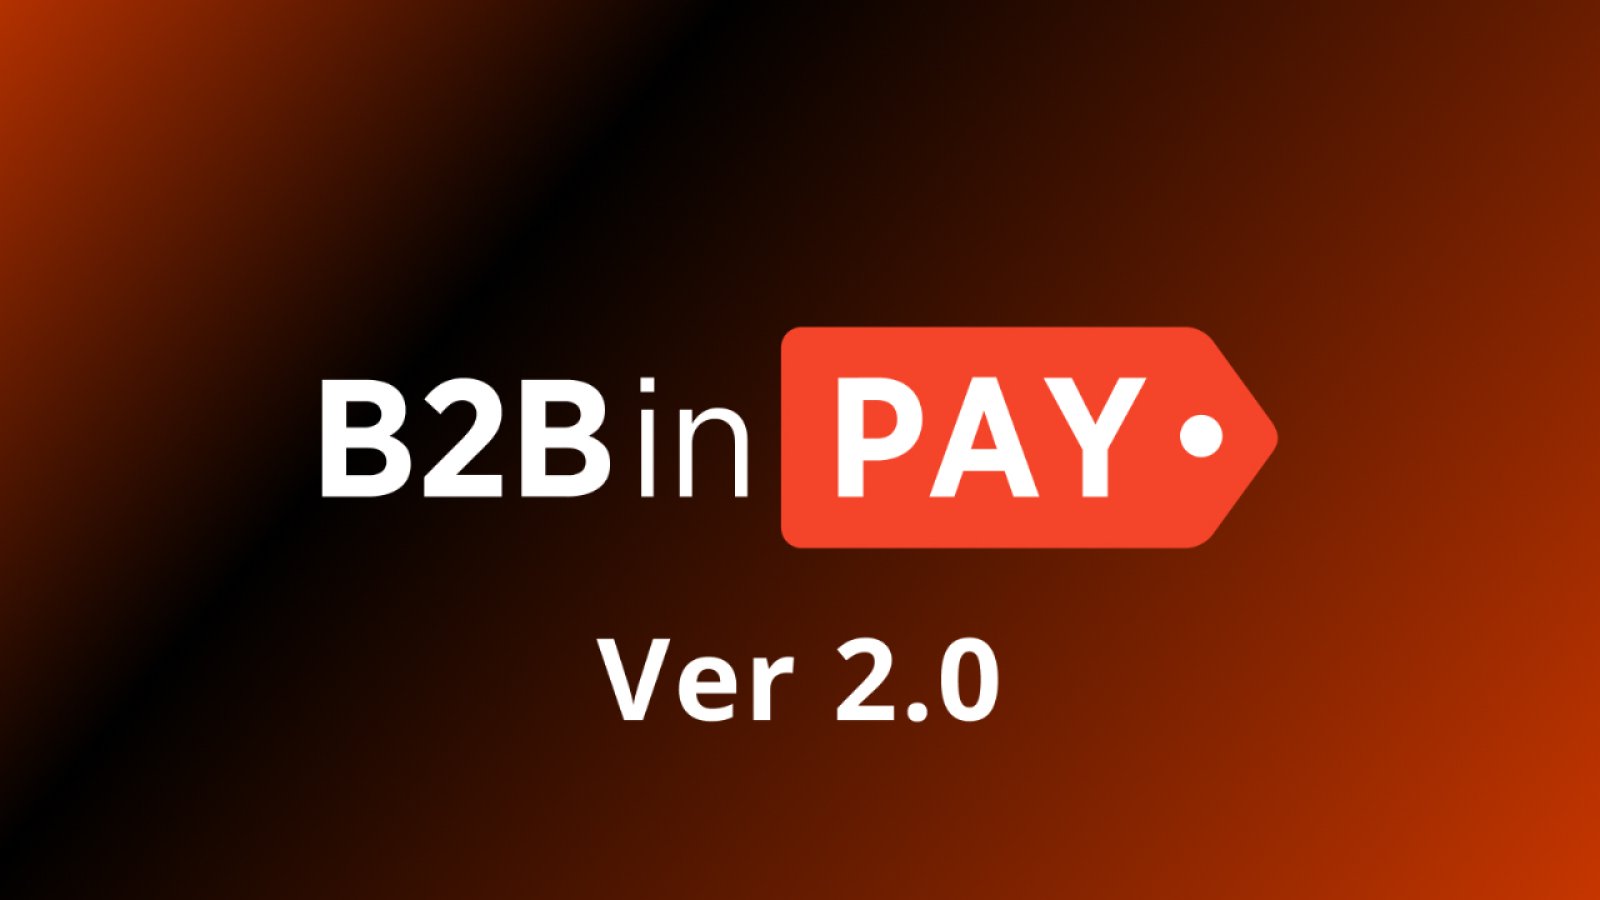 B2BinPay: The Most In-Demand Crypto Payment Provider Gets An Update